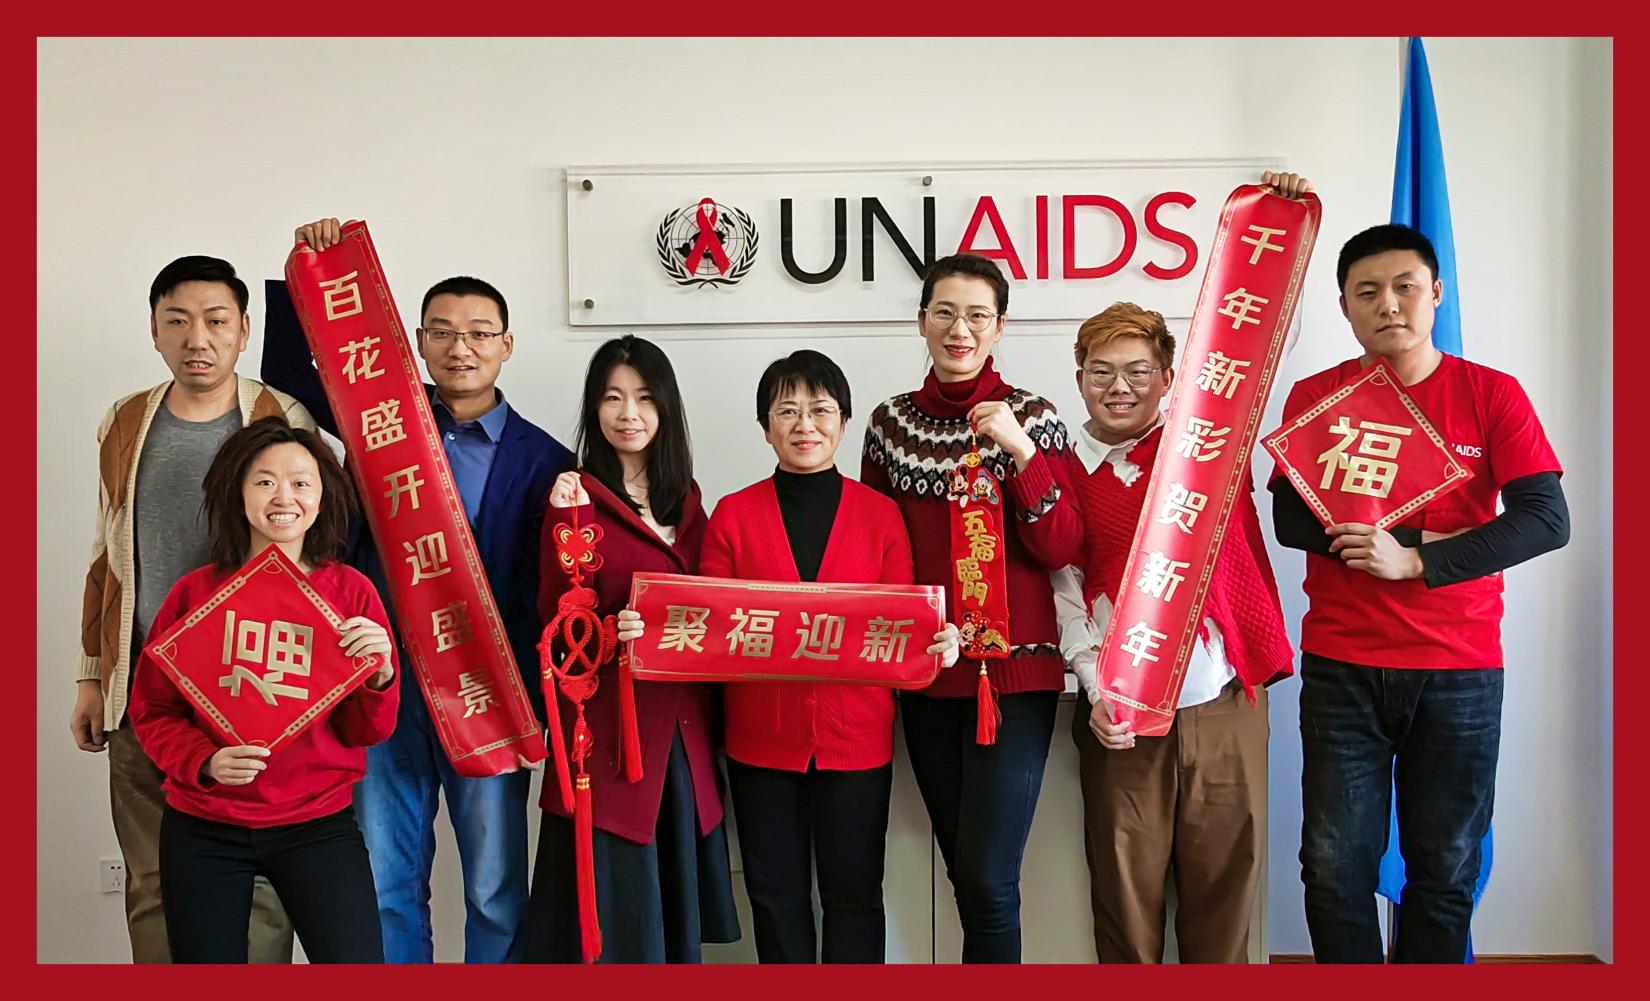 Dr. Zhou Kai and colleagues from UNAIDS China Office sharing greetings for Lunar New Year 2022